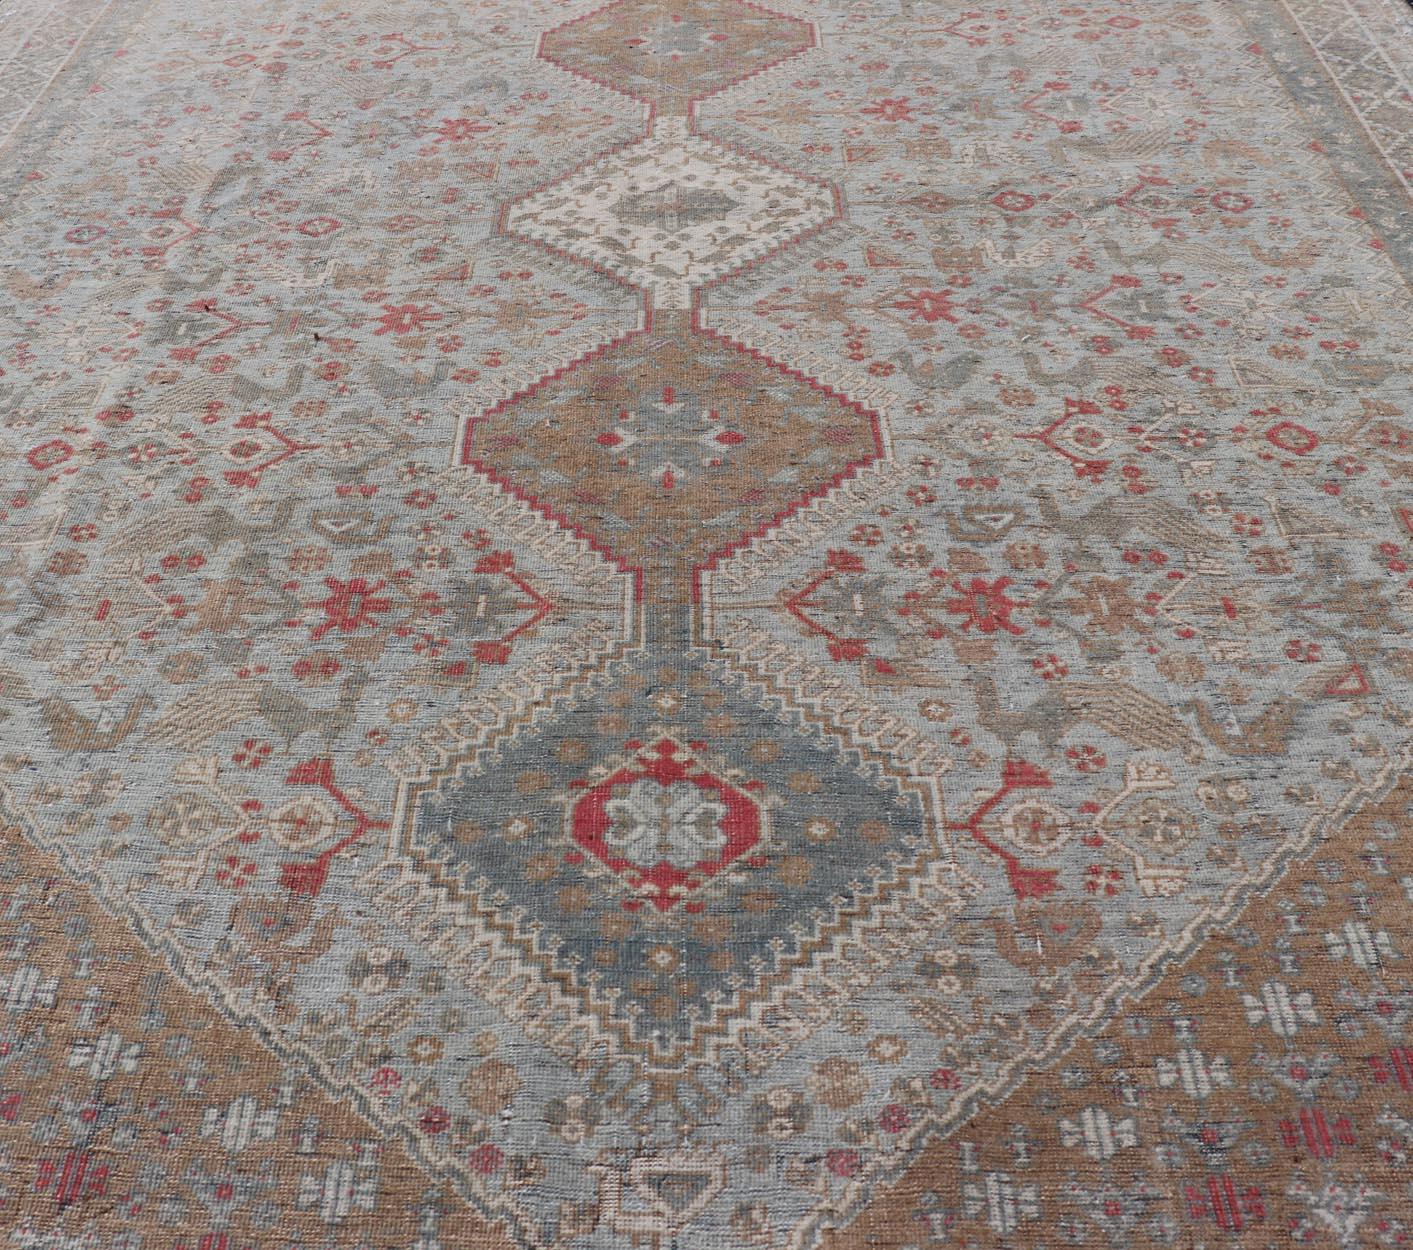  Antique Persian Qashgai Tribal Rug with stacked  diamond medallions and tribal  For Sale 2